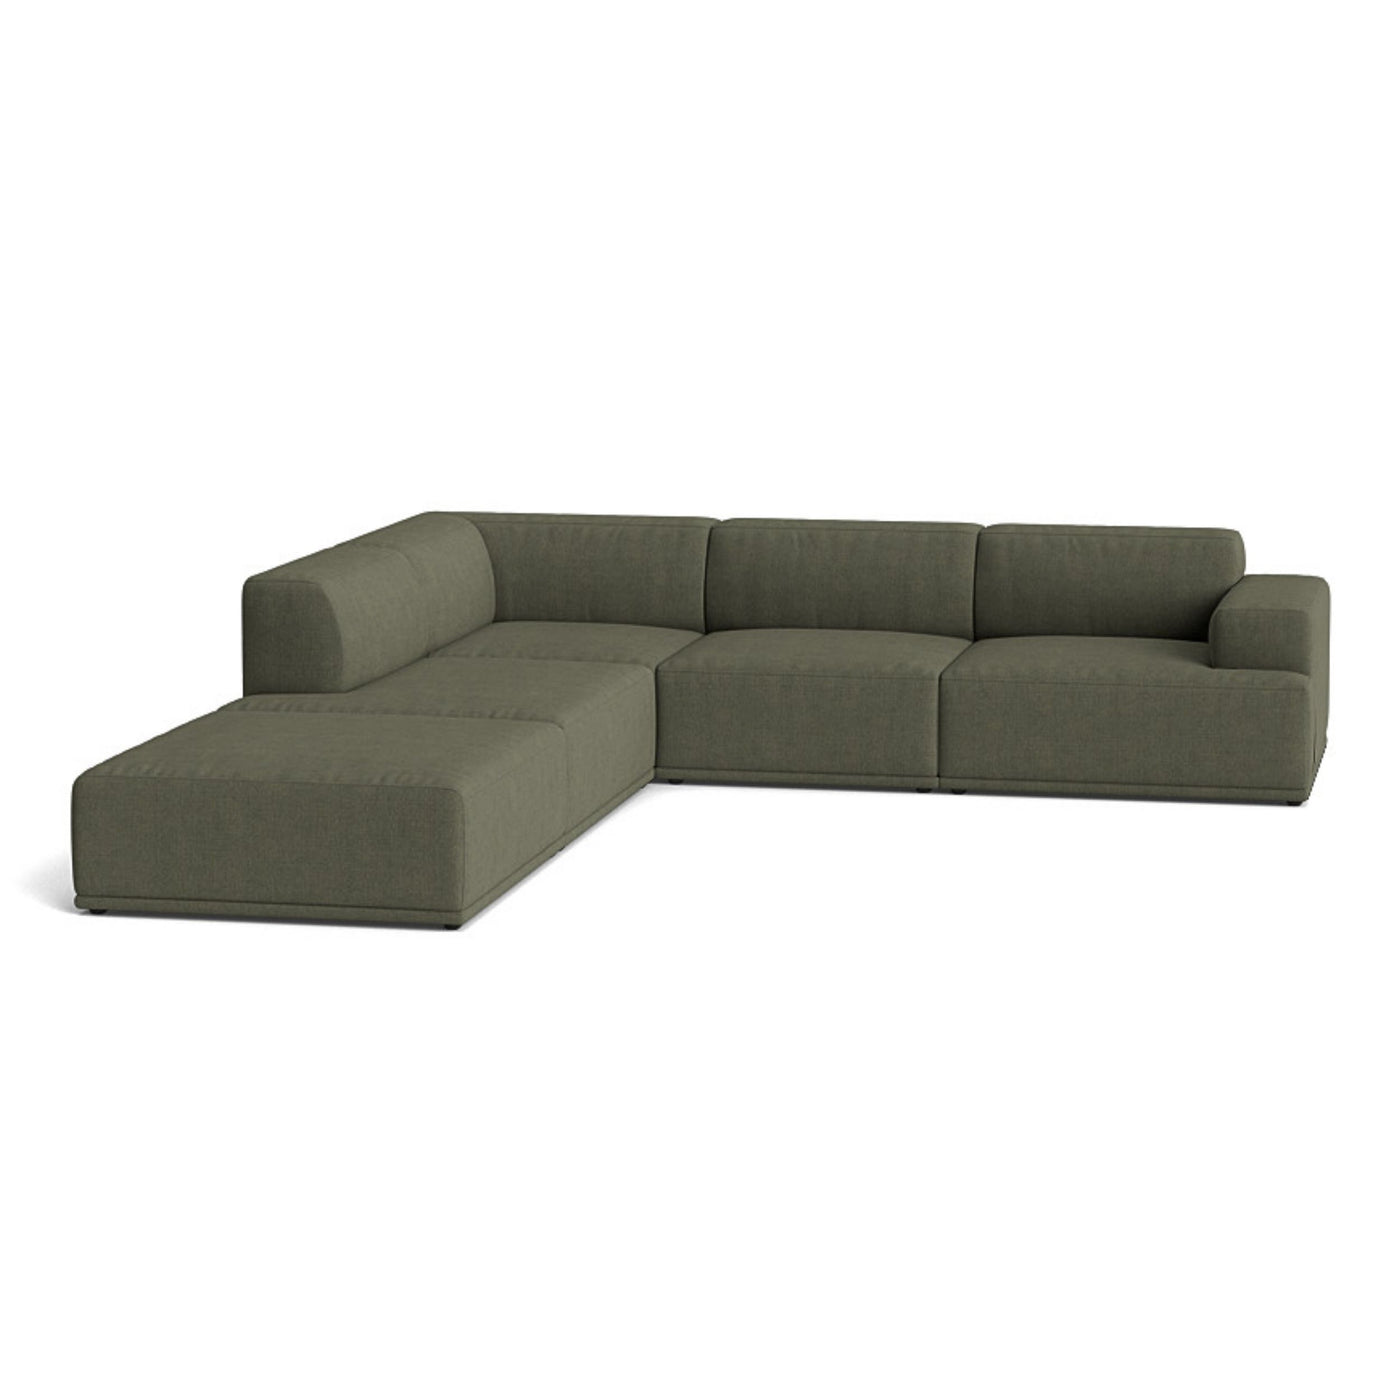 Muuto Connect Soft Modular Corner Sofa, configuration 1. Made-to-order from someday designs. #colour_fiord-961